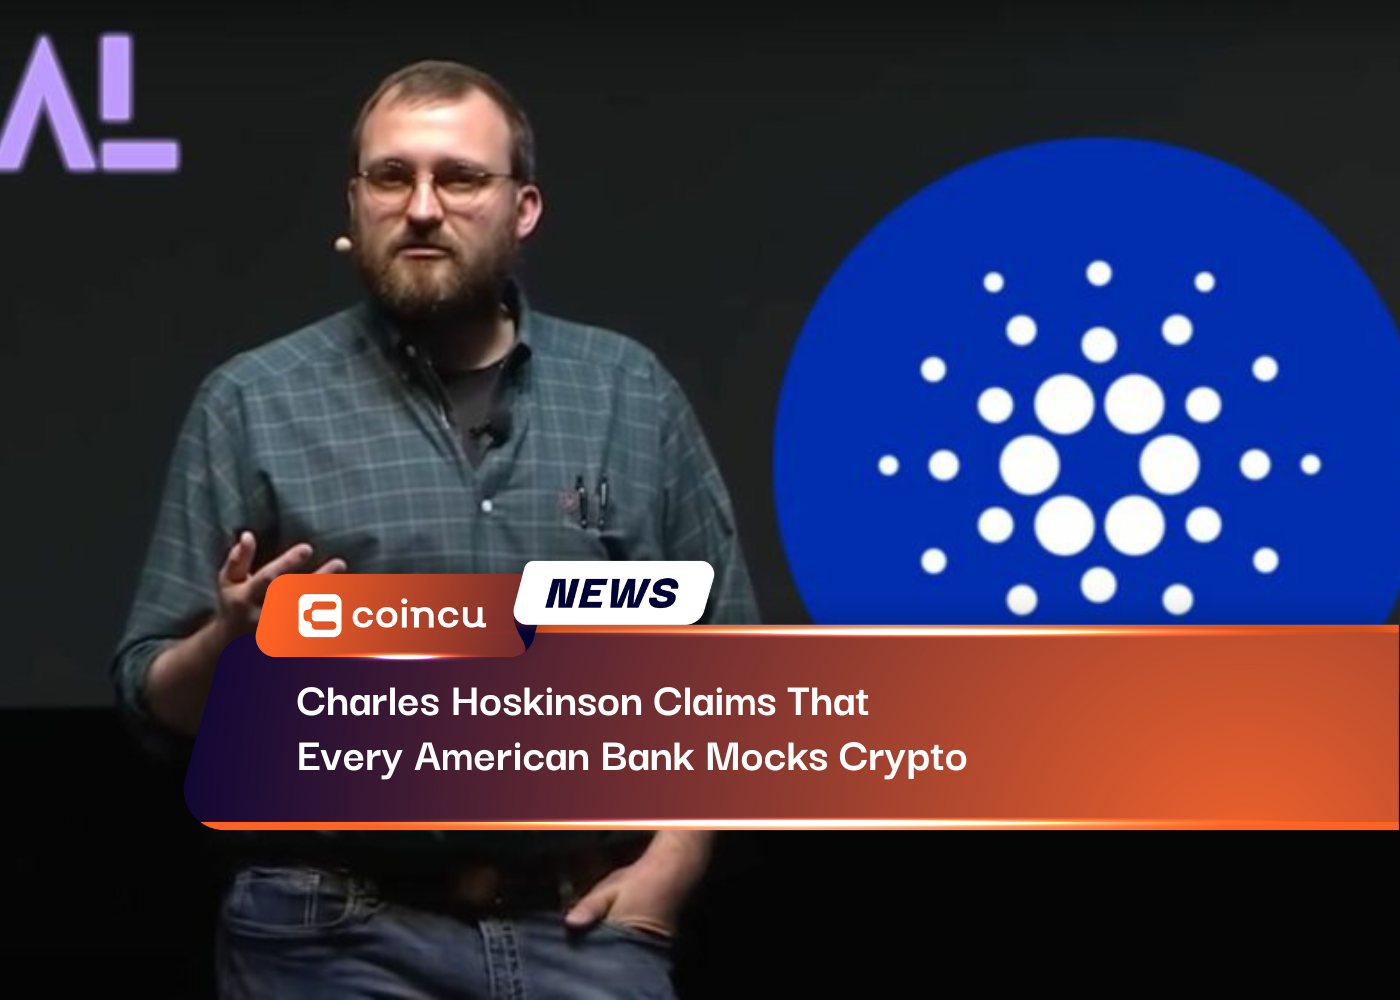 Charles Hoskinson Claims That Every American Bank Mocks Crypto